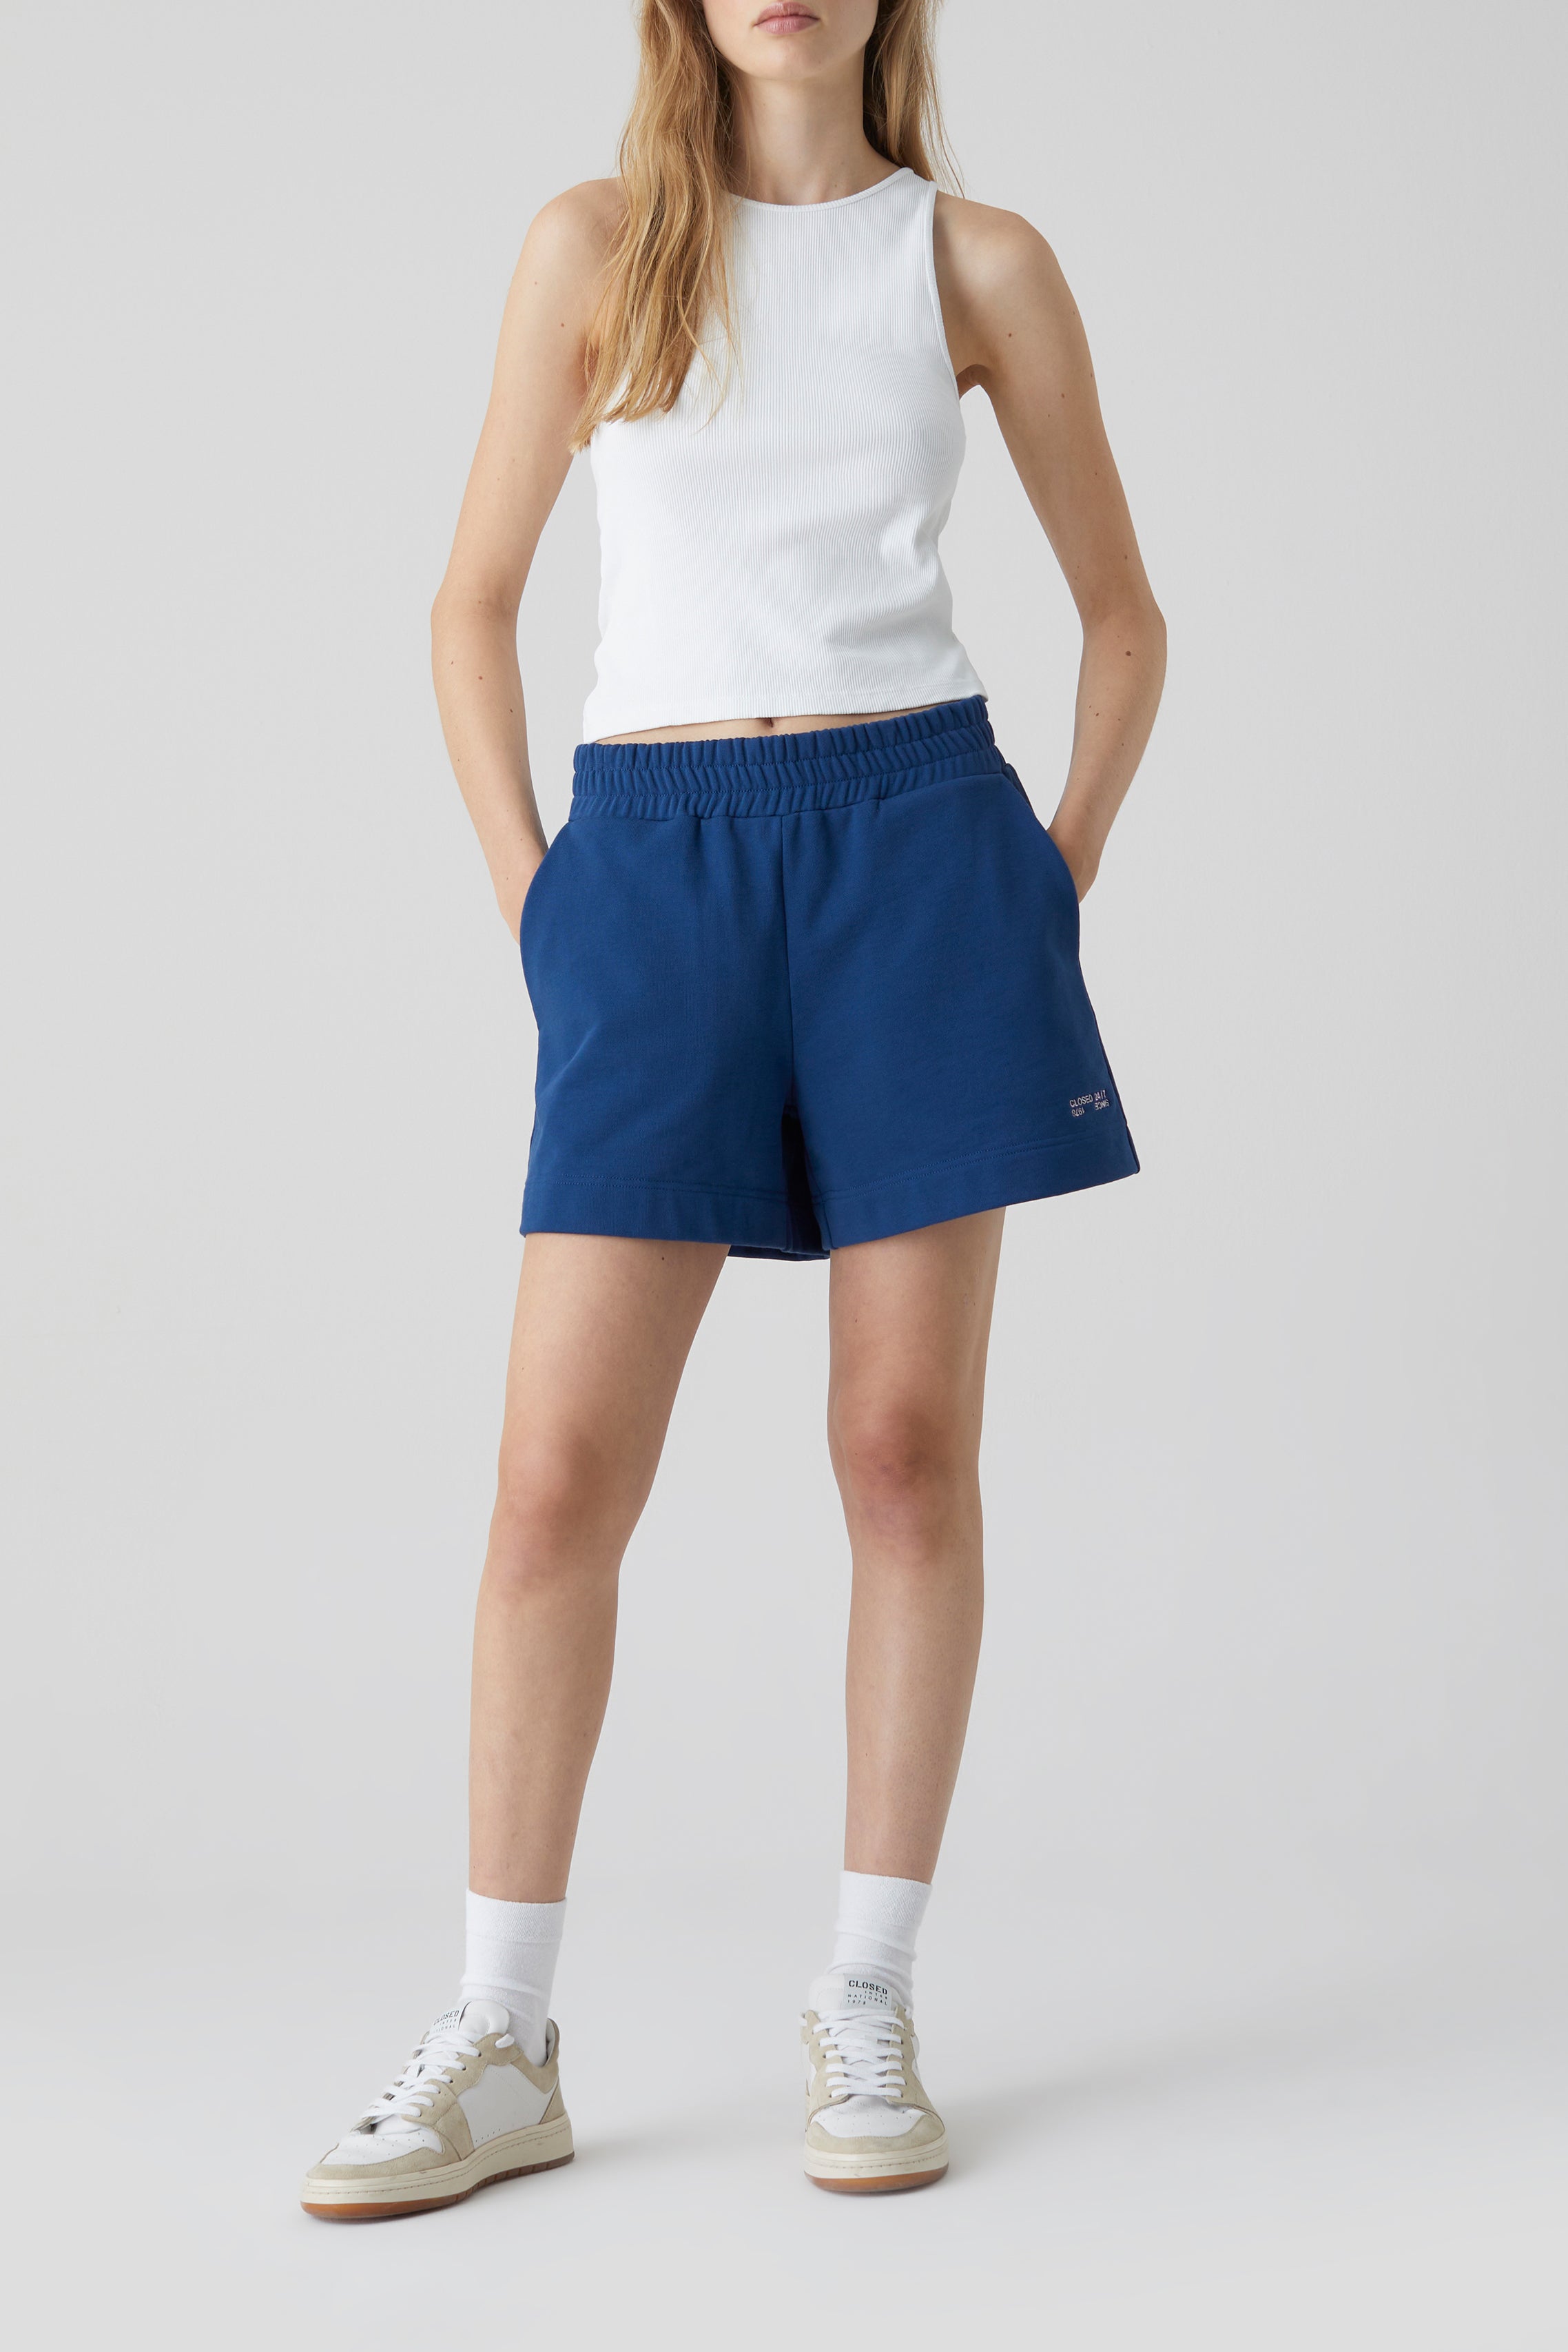 CLOSED-OUTLET-SALE-STYLE-NAME-ELASTIC-SHORTS-Hosen-ARCHIVE-COLLECTION.jpg